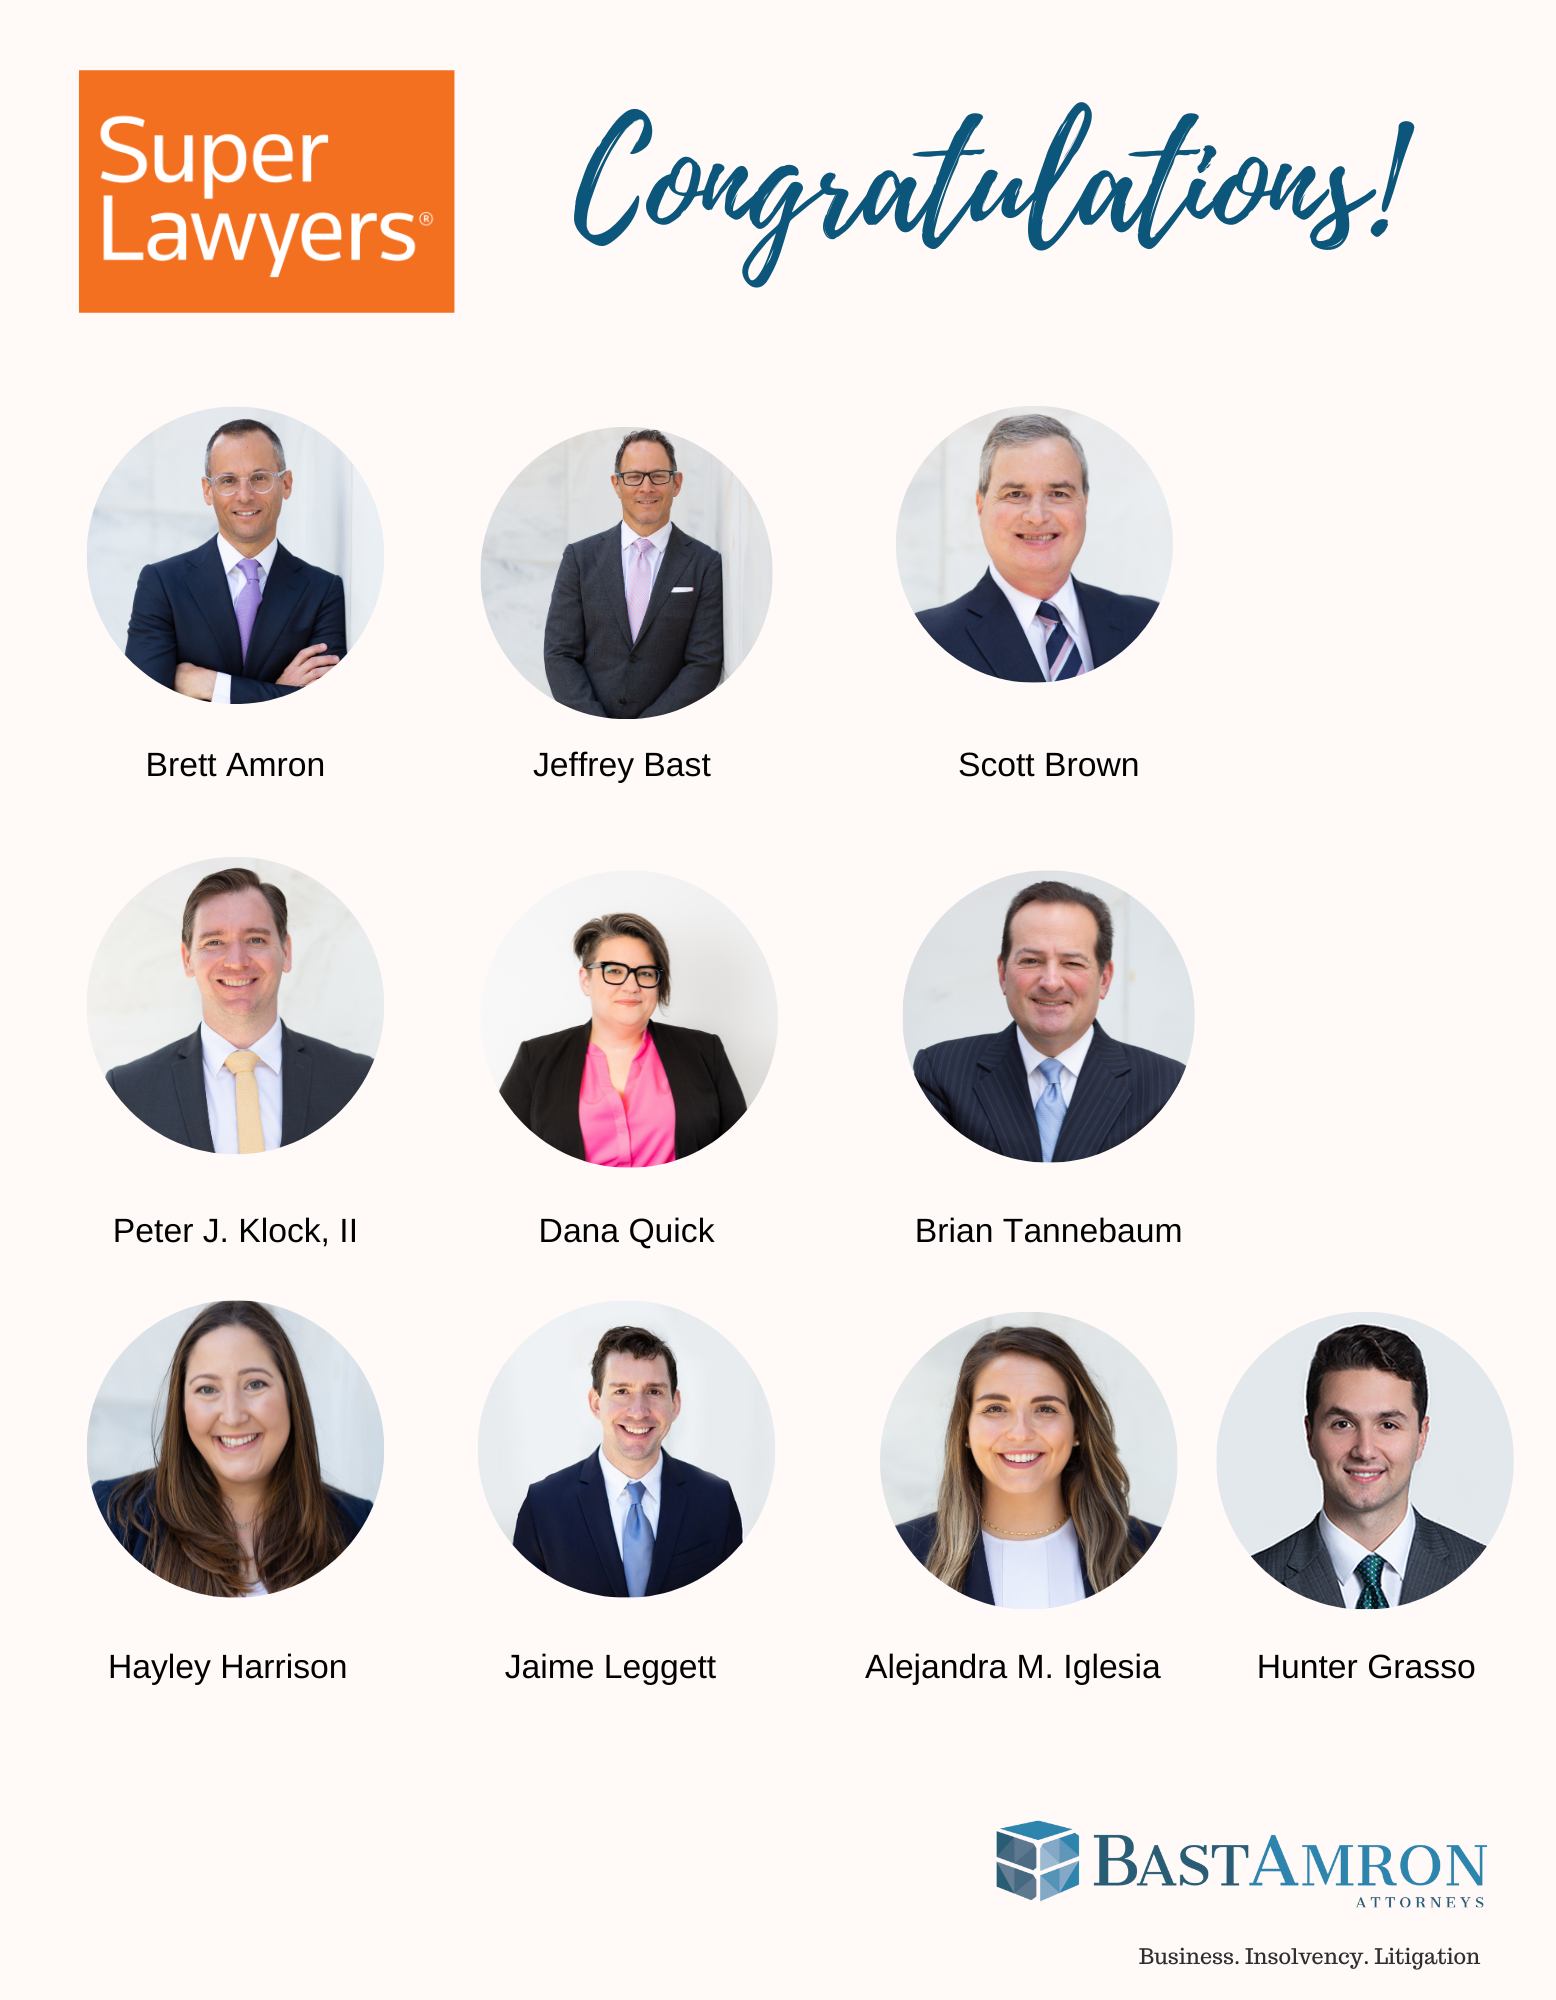 TEN BAST AMRON ATTORNEYS RECOGNIZED IN 2023 EDITION OF FLORIDA SUPER LAWYERS